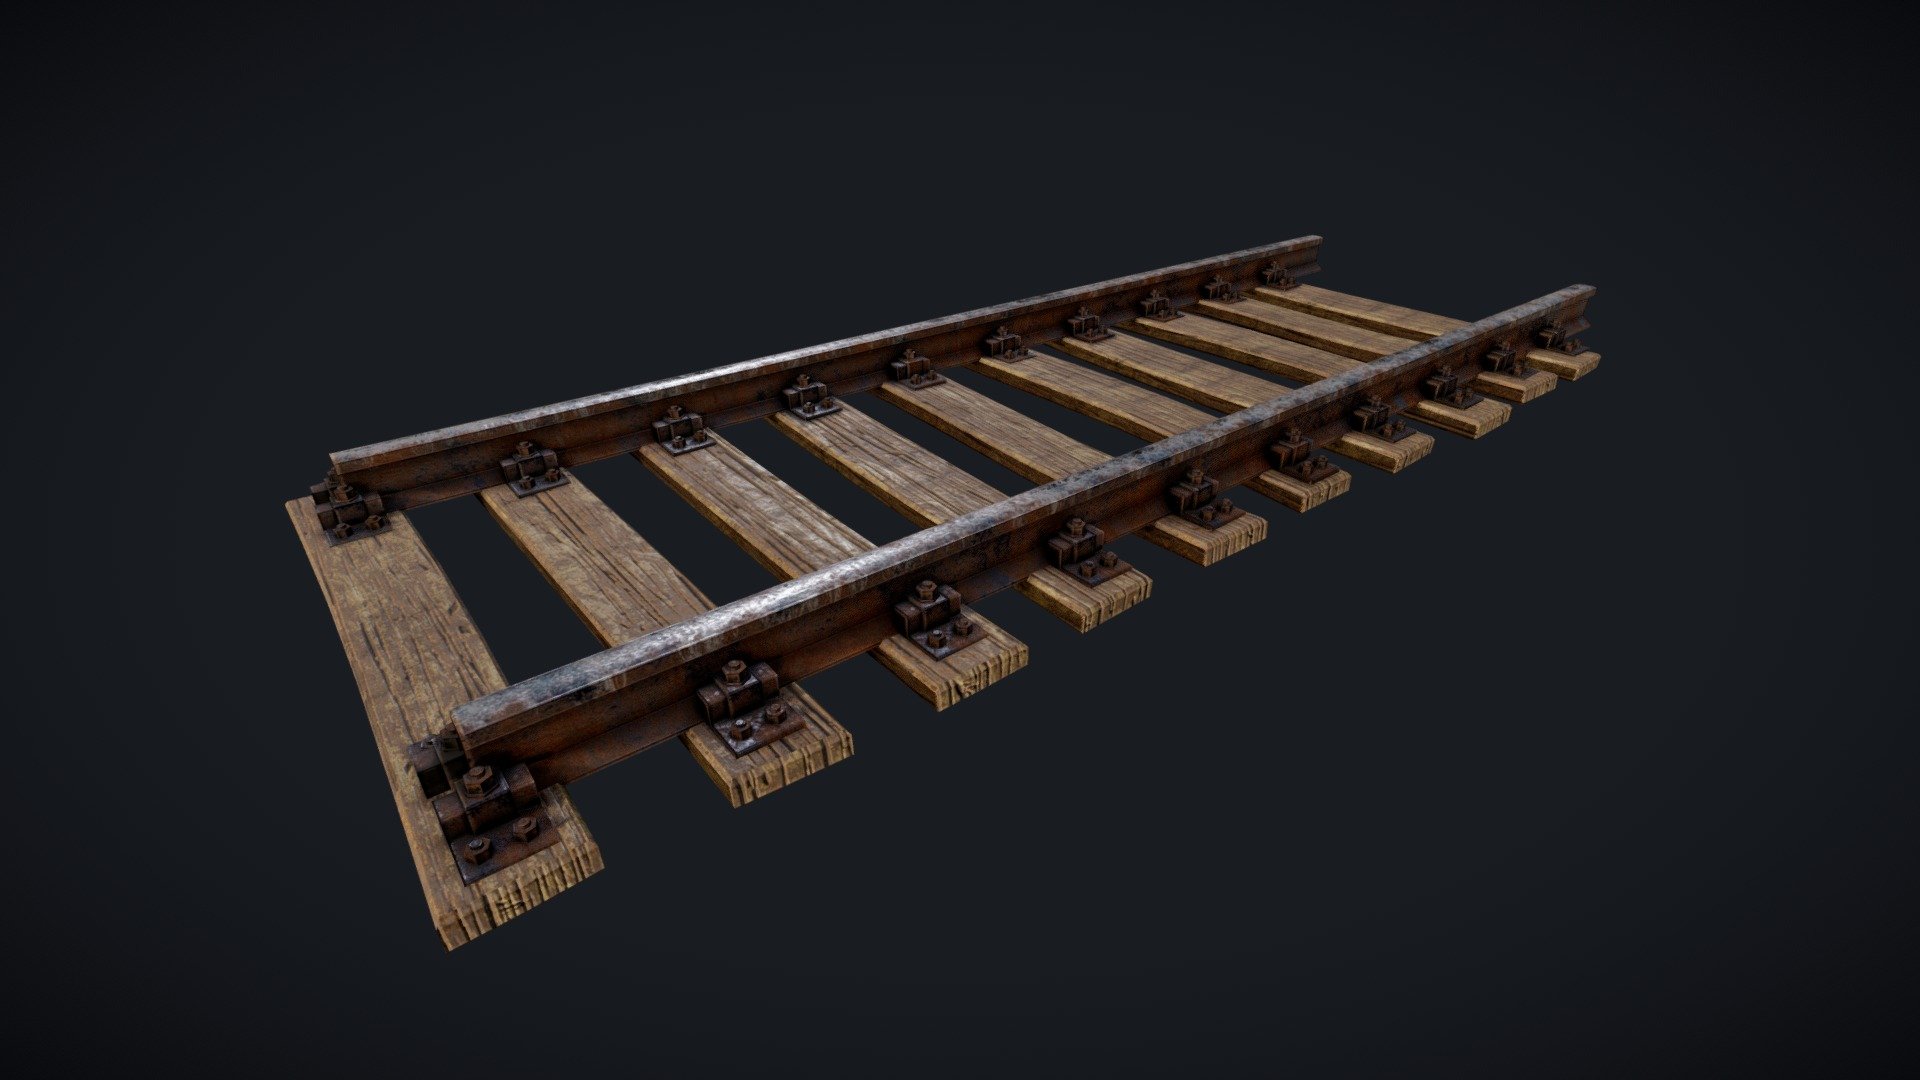 This model was part of a scene I made in Unreal Engine 4.
https://www.artstation.com/artwork/XvKG0
During this project I learned to basics of Substance Designer. The wood is made in Designer and used substance painter to texture the model 3d model